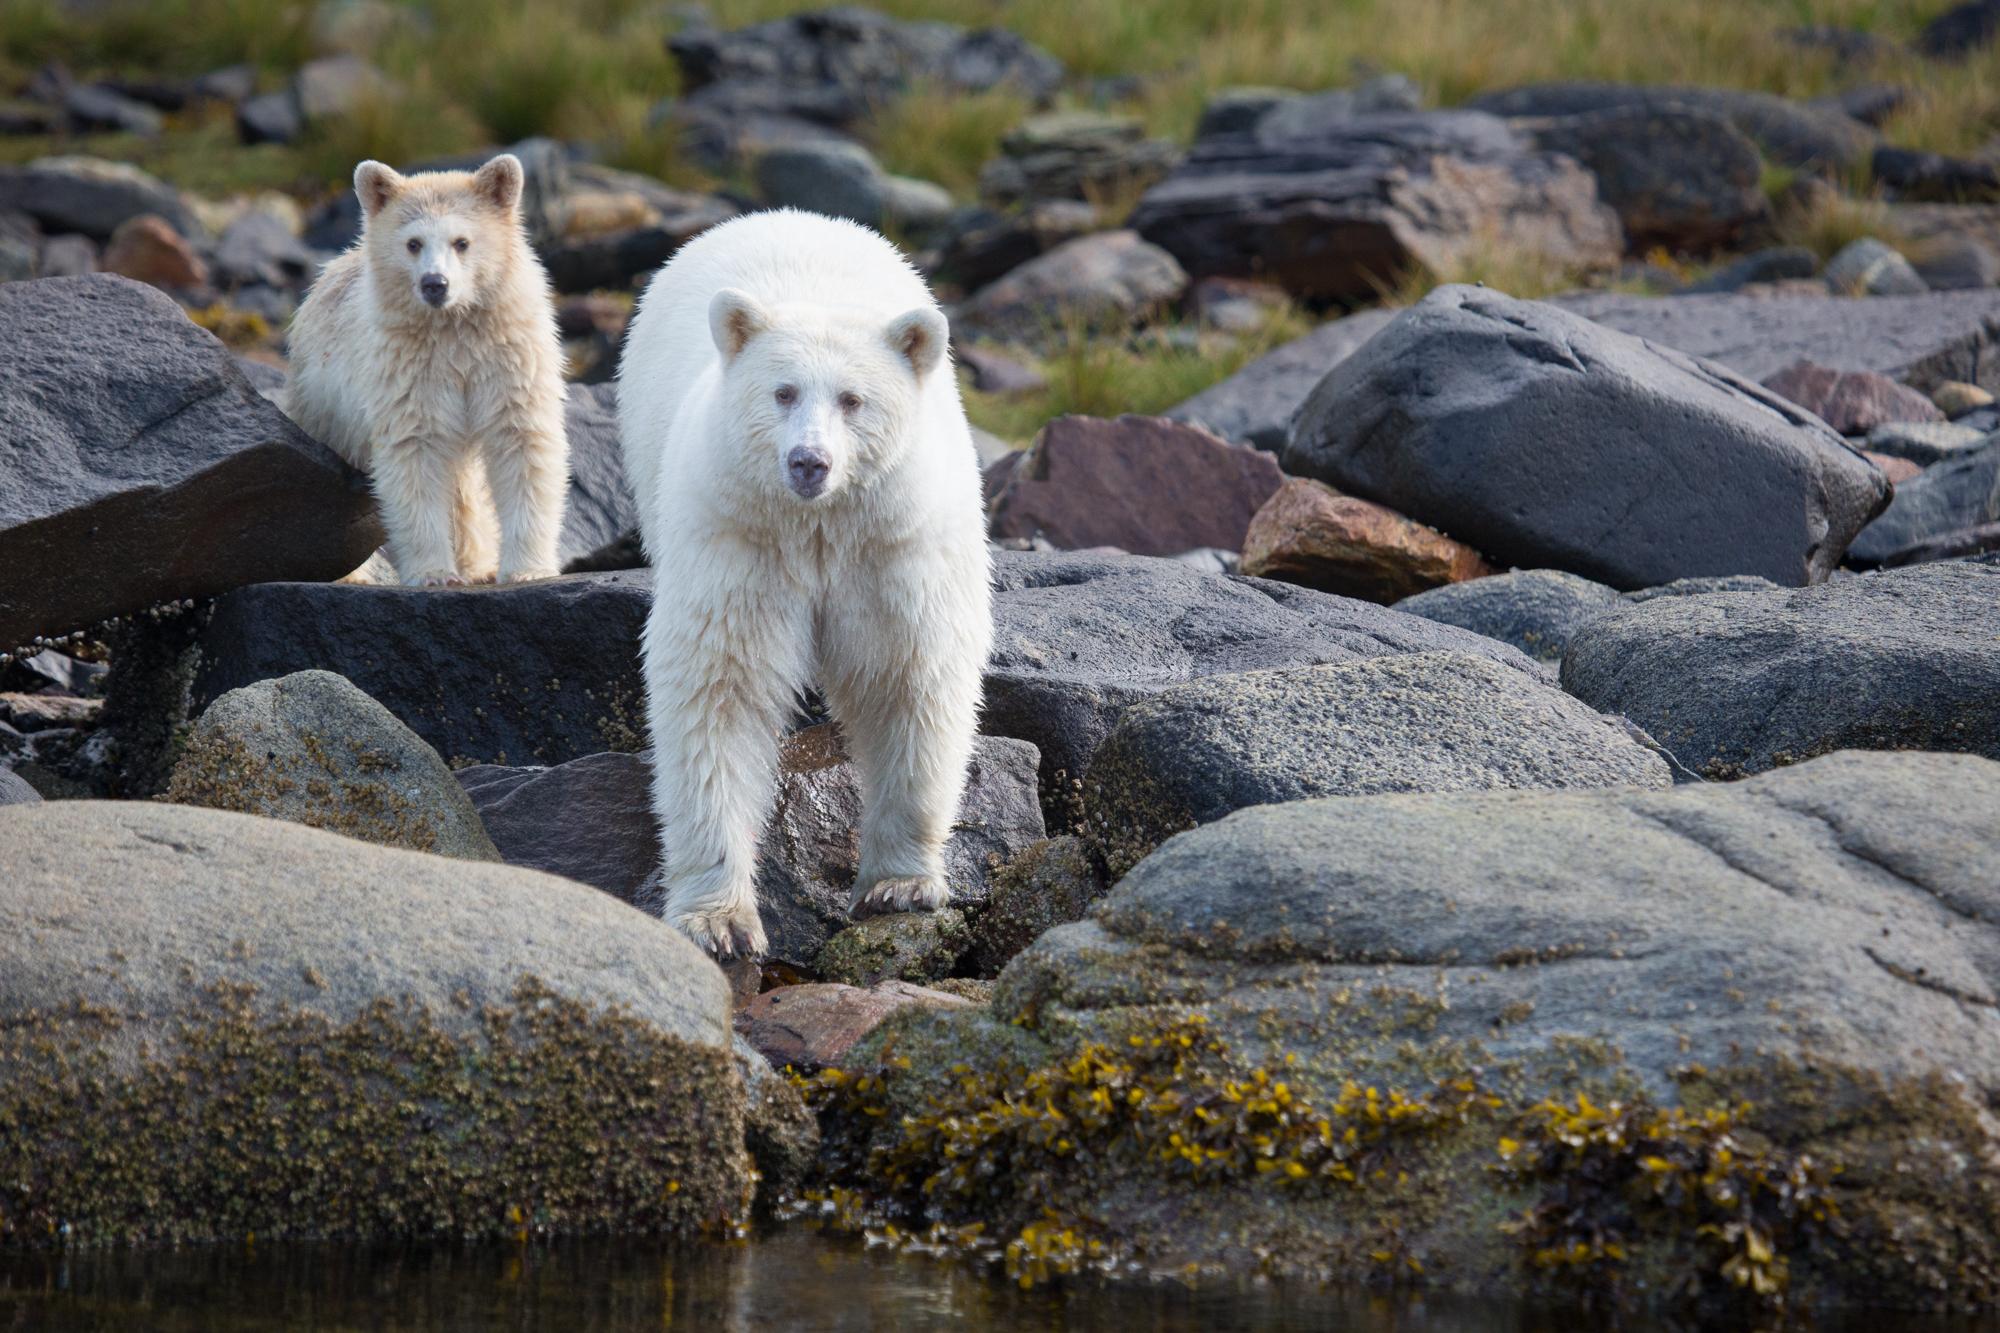 Find white spirit bears in the Great Bear Rainforest in British Columbia